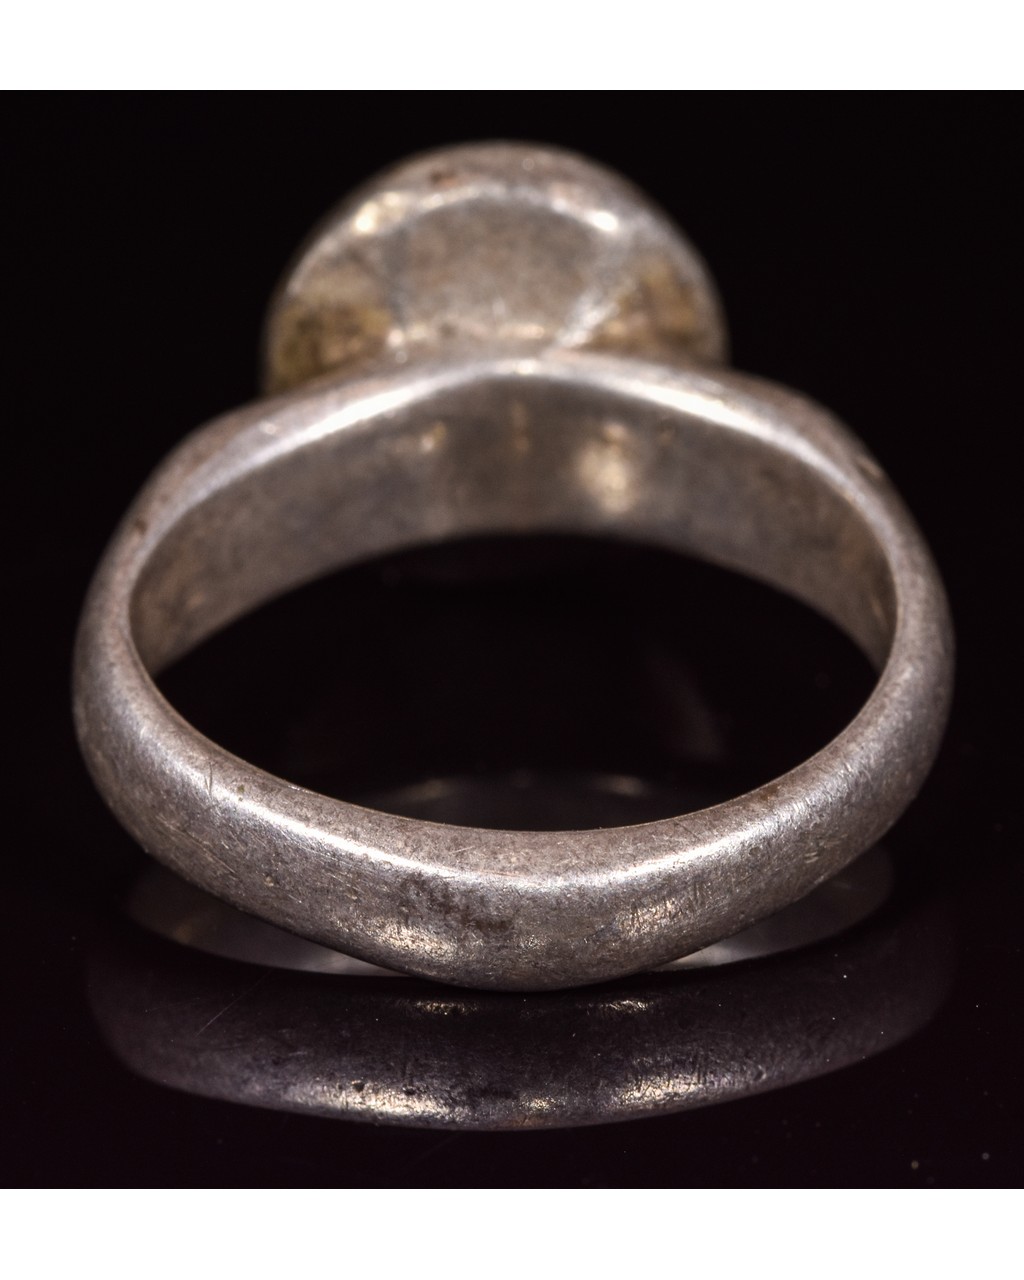 VIKING PERIOD SILVER RING WITH FLYING BIRD - Image 4 of 5